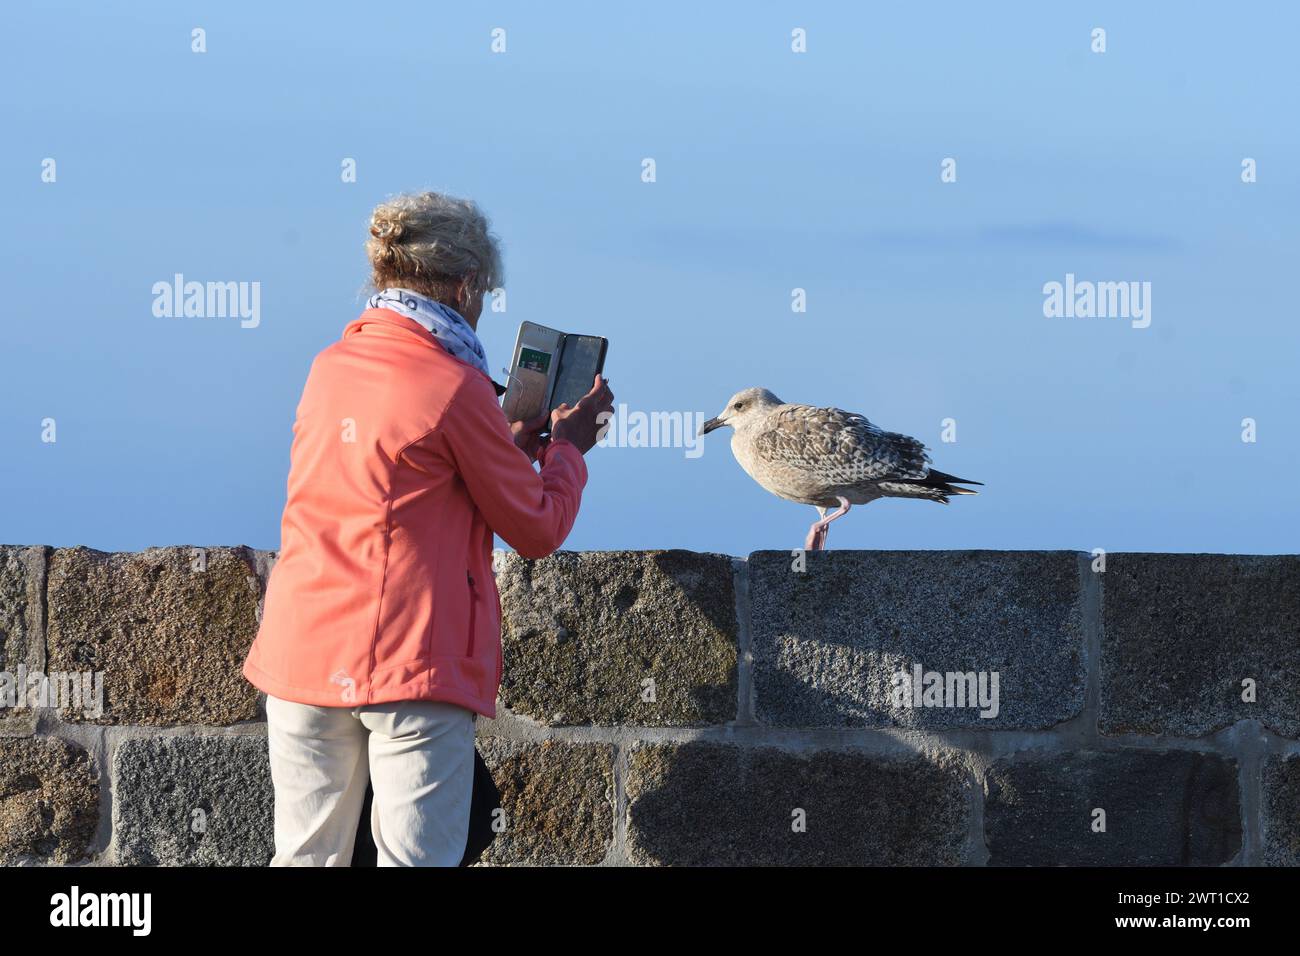 herring gull, European herring gull (Larus argentatus), older woman taking a photo of a young herring gull on a wall using her smartphone, France, Bri Stock Photo